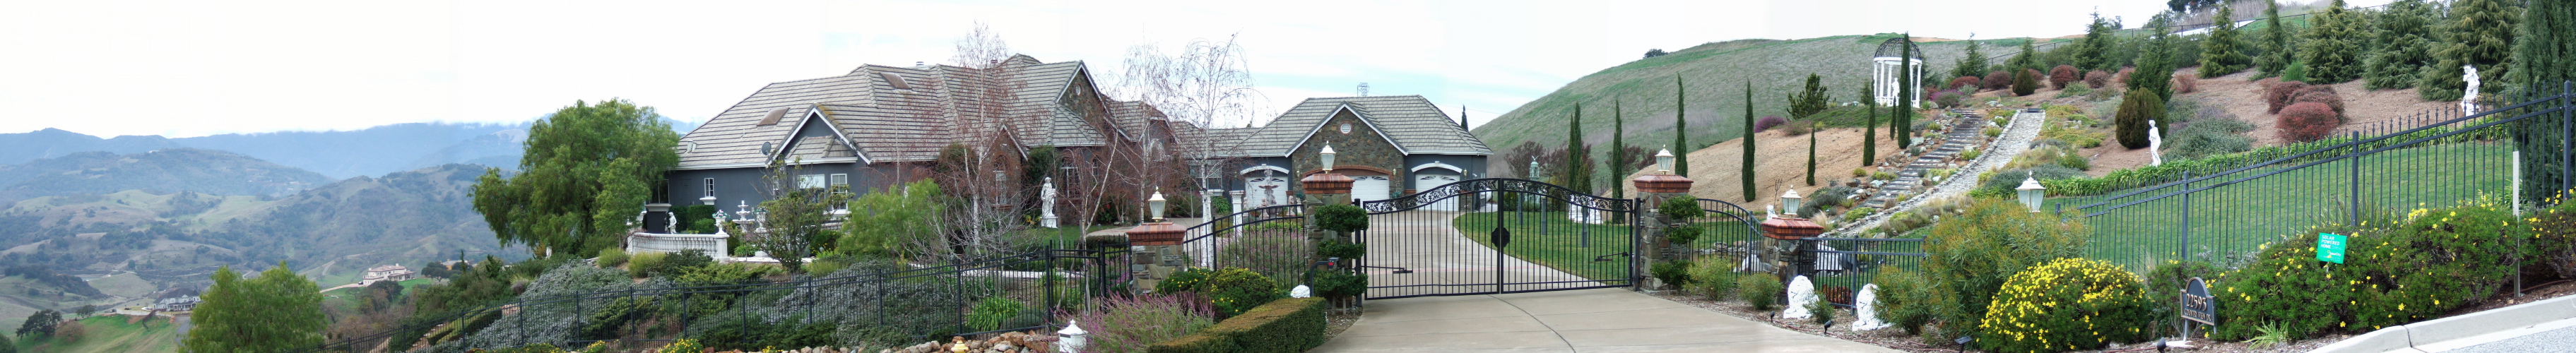 The uppermost completed estate on Countryview Drive.